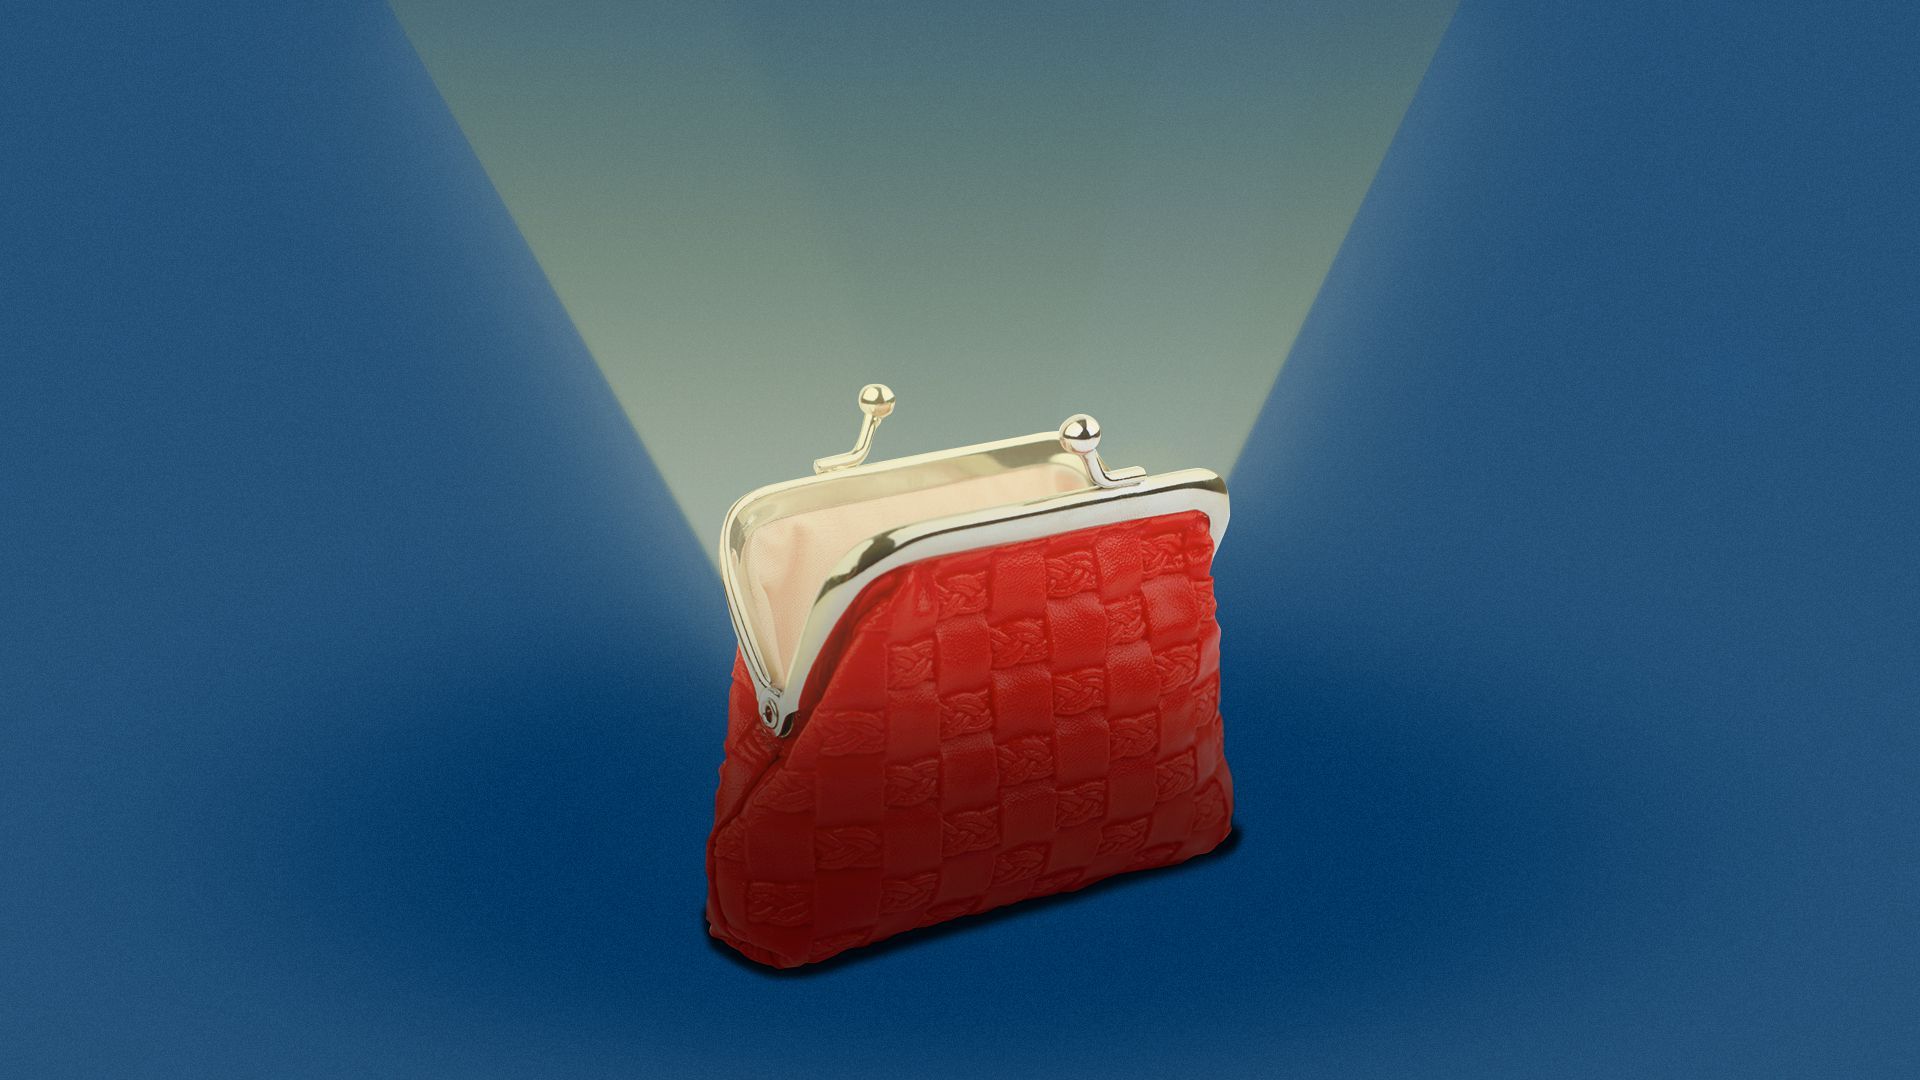 Illustration of a glowing wallet